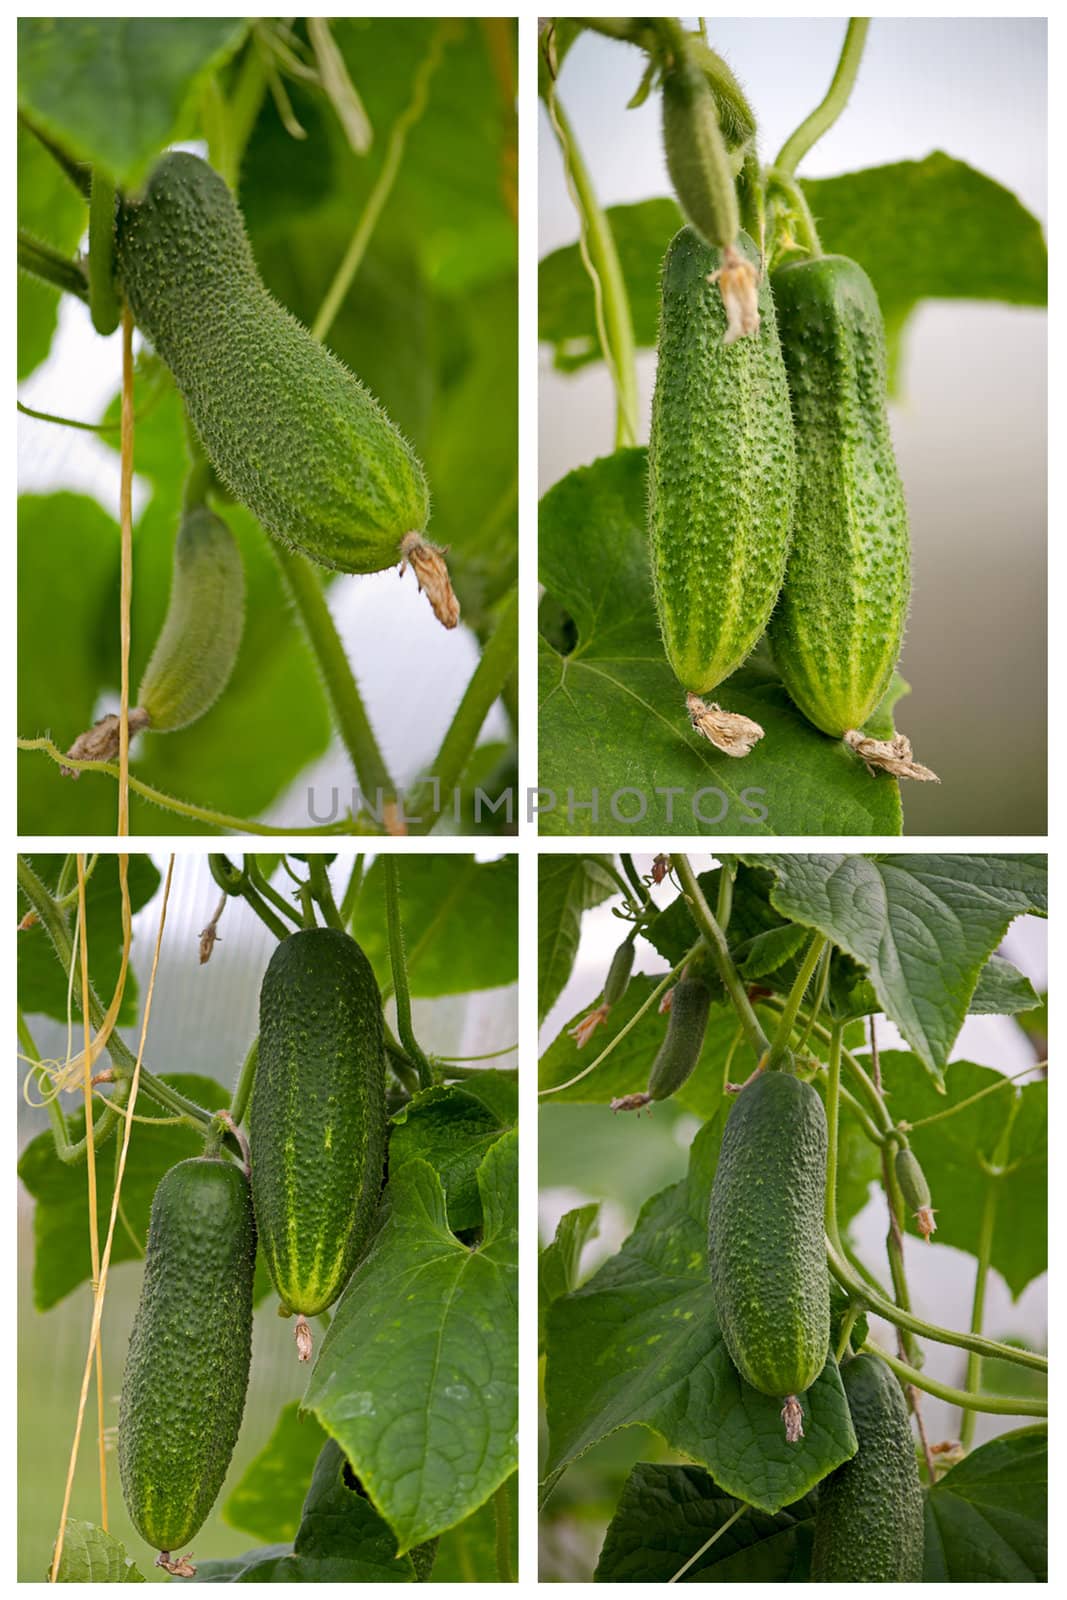 Cucumbers  close up on  branch against  background of leaves.